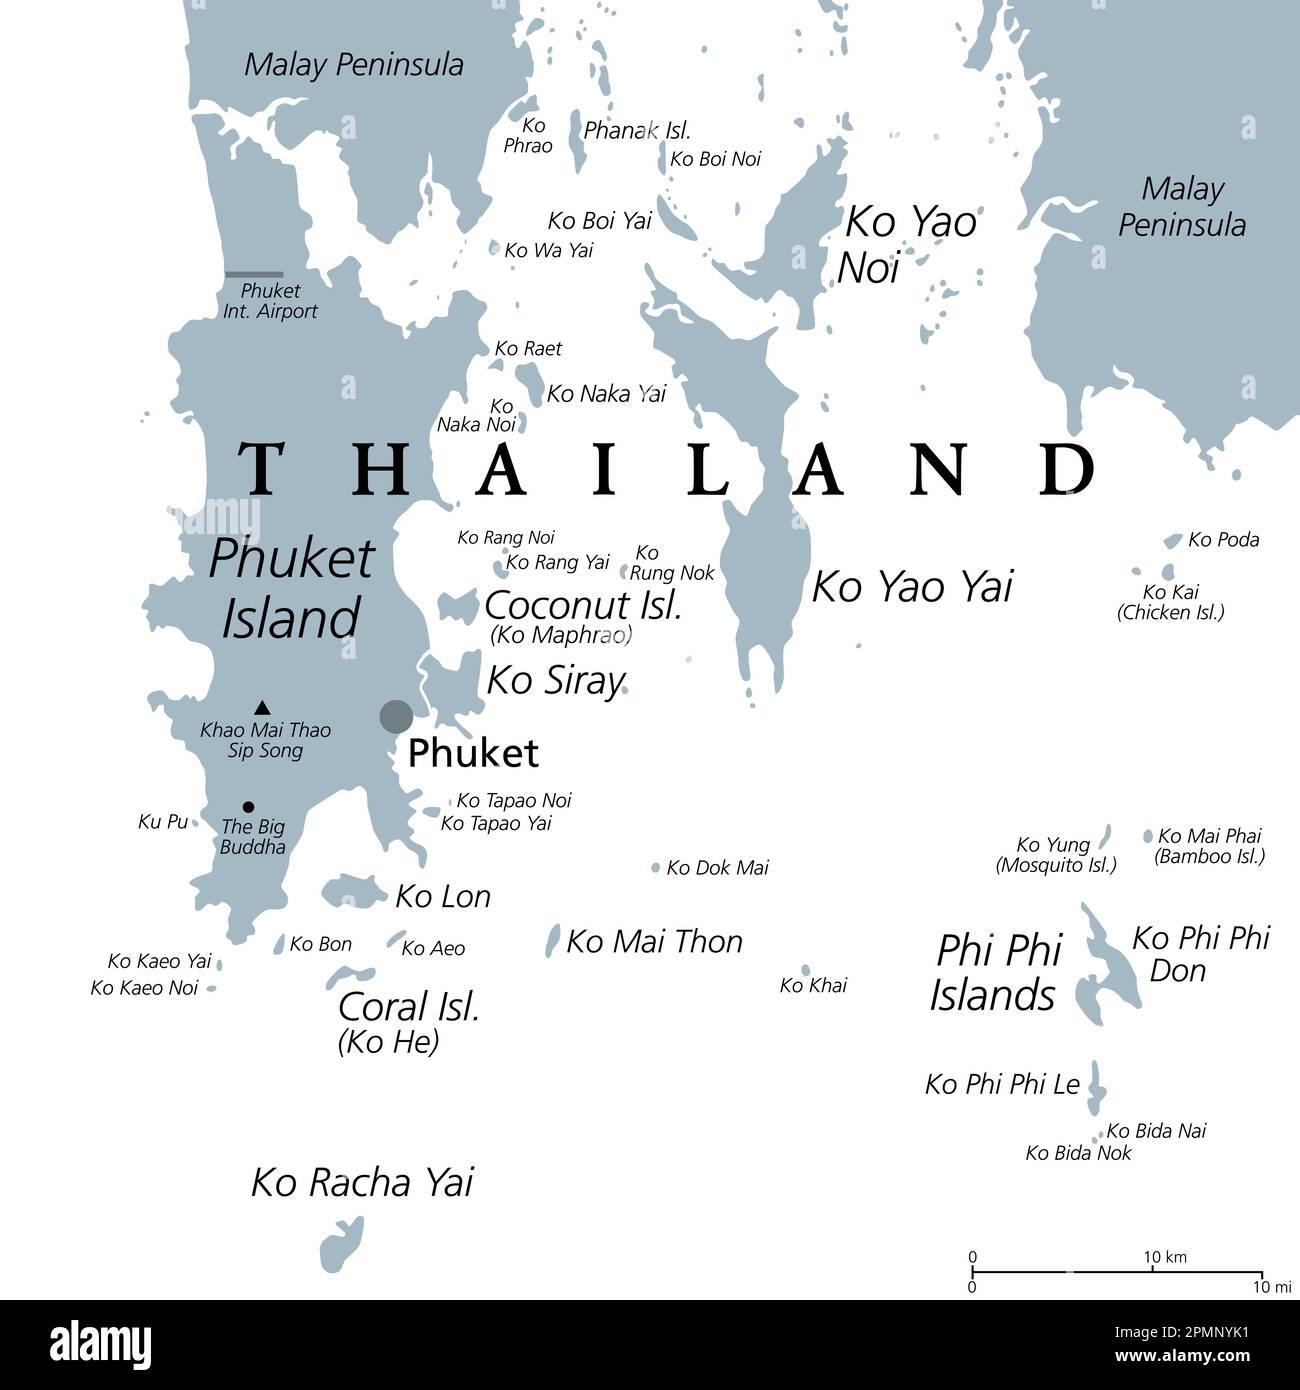 Phuket, largest Island of Thailand, gray political map, with surrounding area. Popular tourist region, with islands, south of Malay Peninsula. Stock Photo